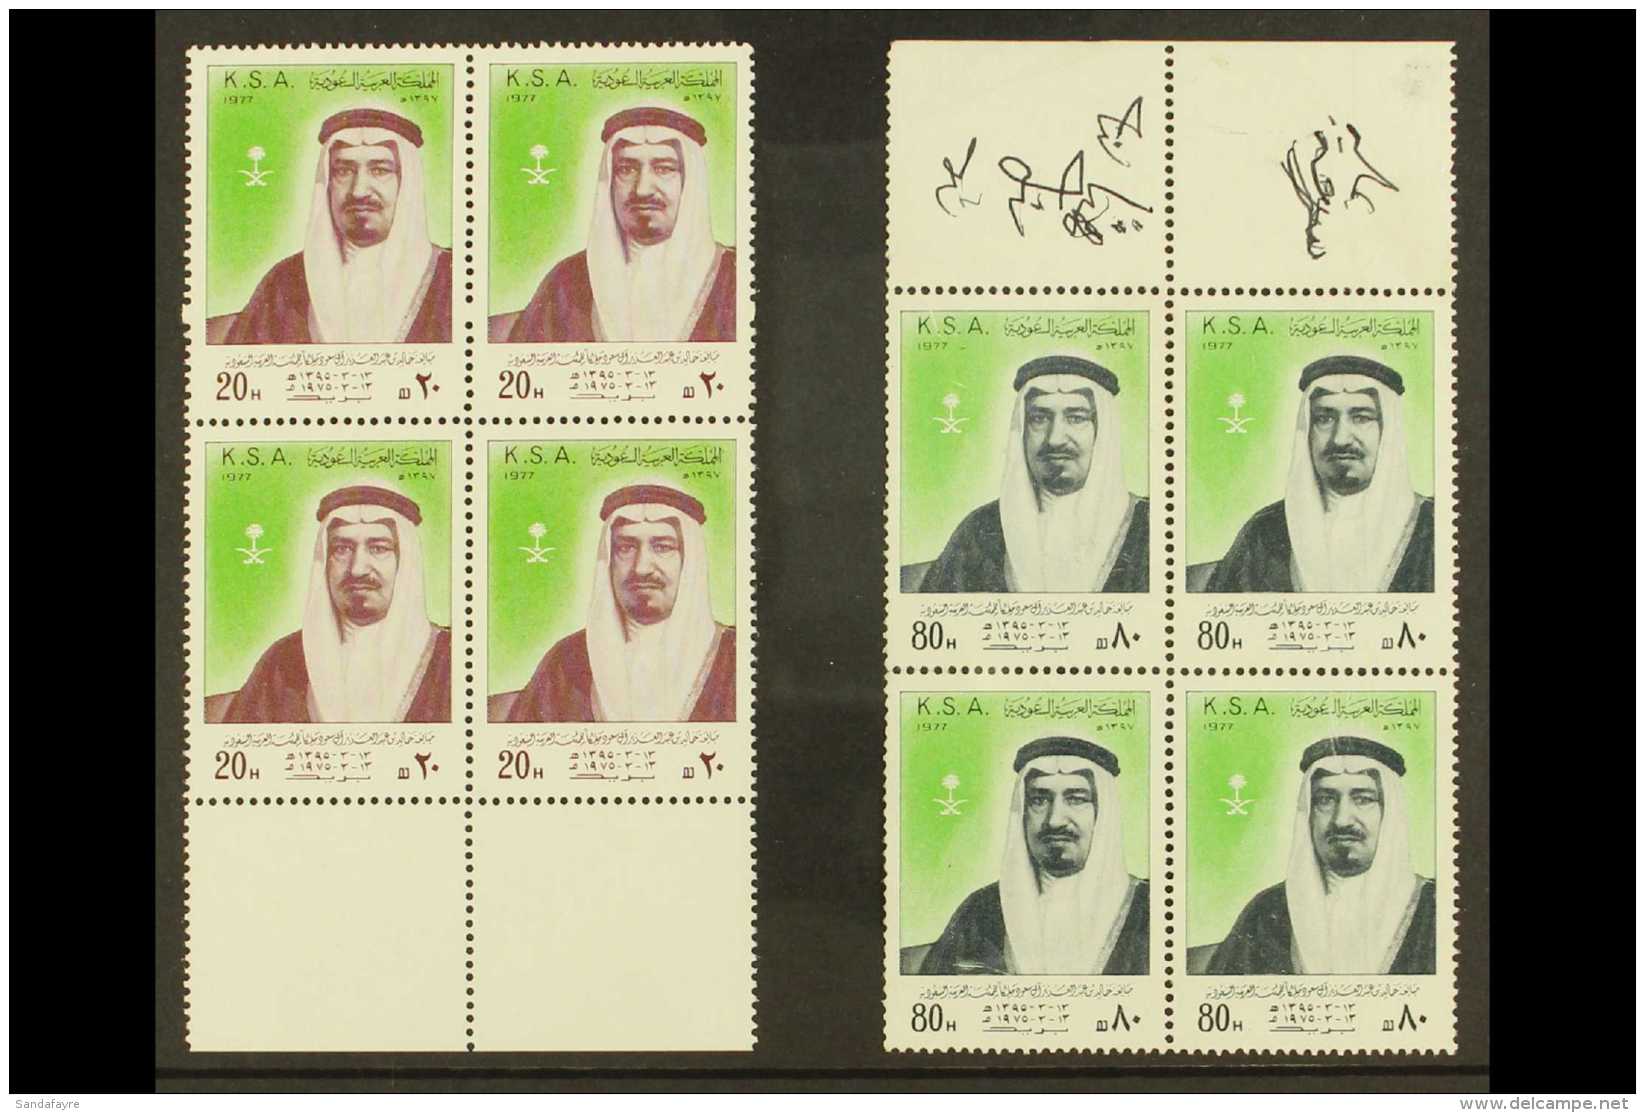 1977 20h And 80h 2nd Anniv With ERROR OF DATES, SG 1197/1198, With Each As Never Hinged Mint Marginal Blocks Of... - Saudi Arabia